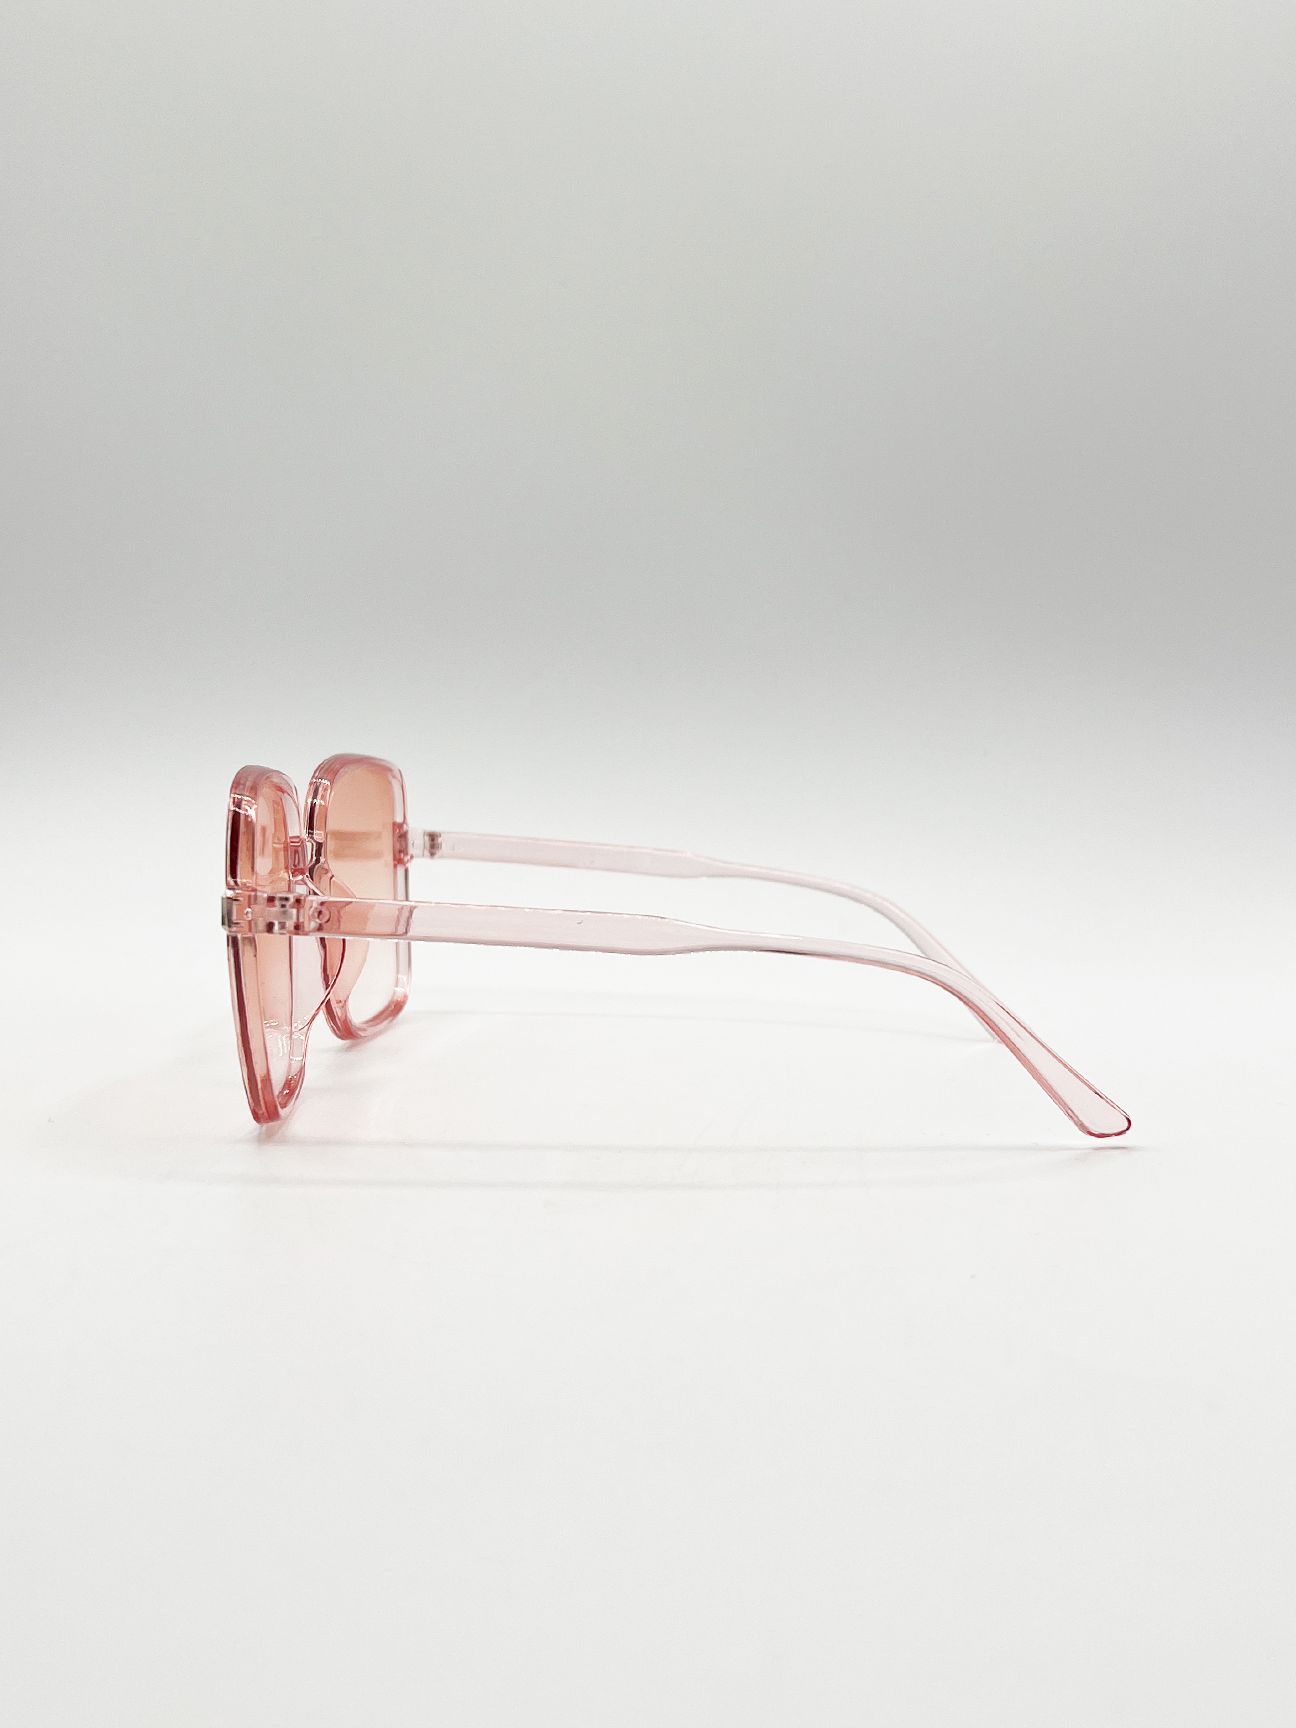 Oversized Lightweight Square Frame Sunglasses in Pale Pink